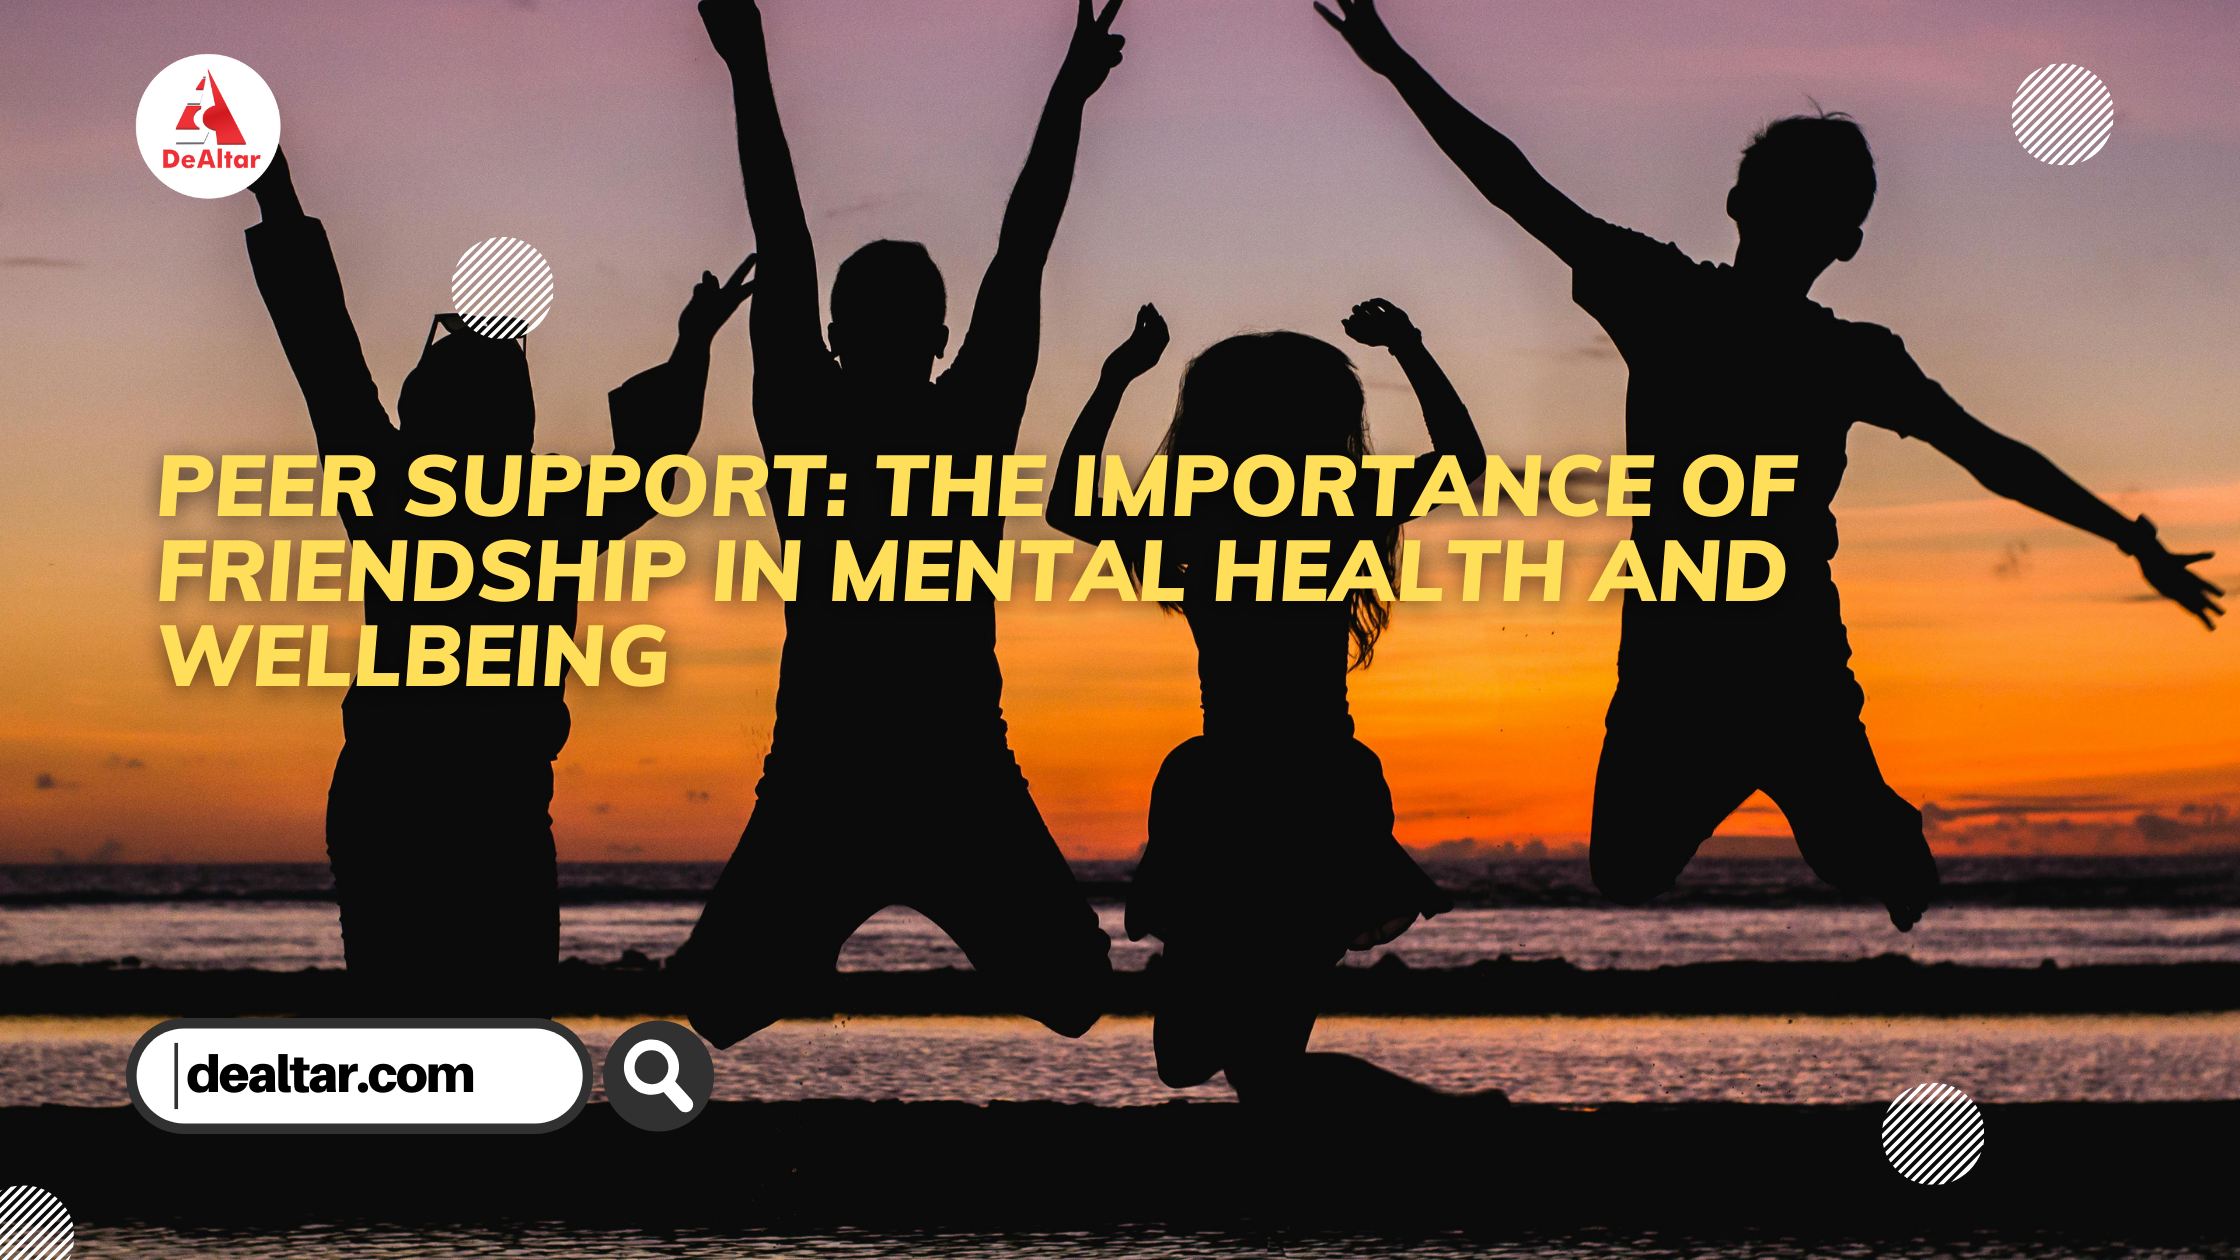 PEER SUPPORT: THE IMPORTANCE OF FRIENDSHIP IN MENTAL HEALTH AND WELLBEING